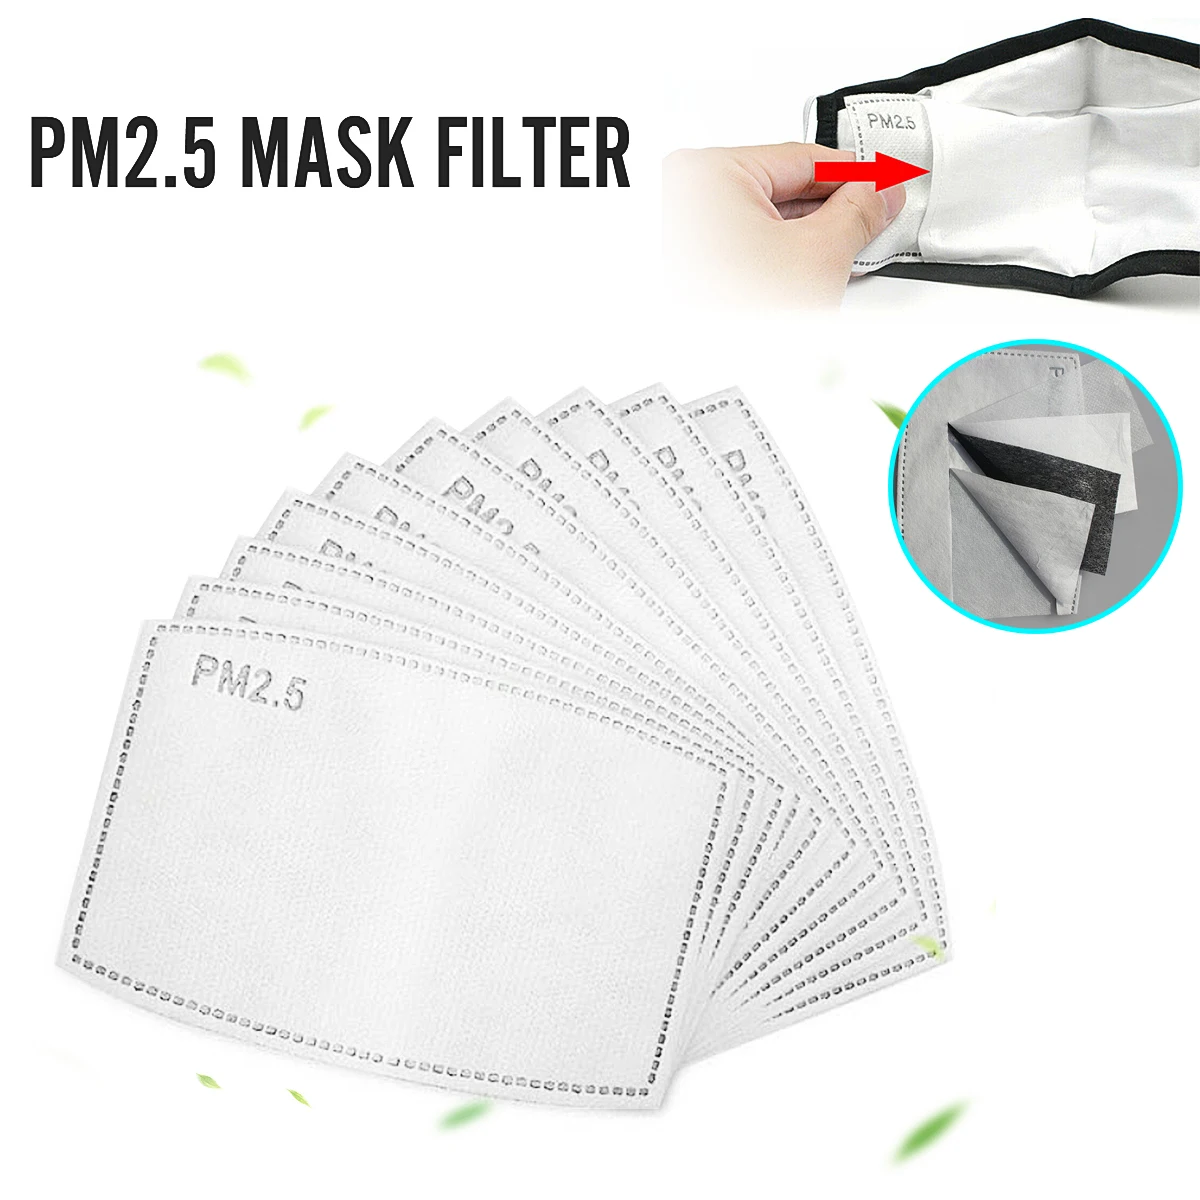 

20/50/100pcs Lot 5 Layers PM2.5 Mask Filter Activated Carbon for Mouth Face Cover Kids Adult Anti Dust Pollution Disposable